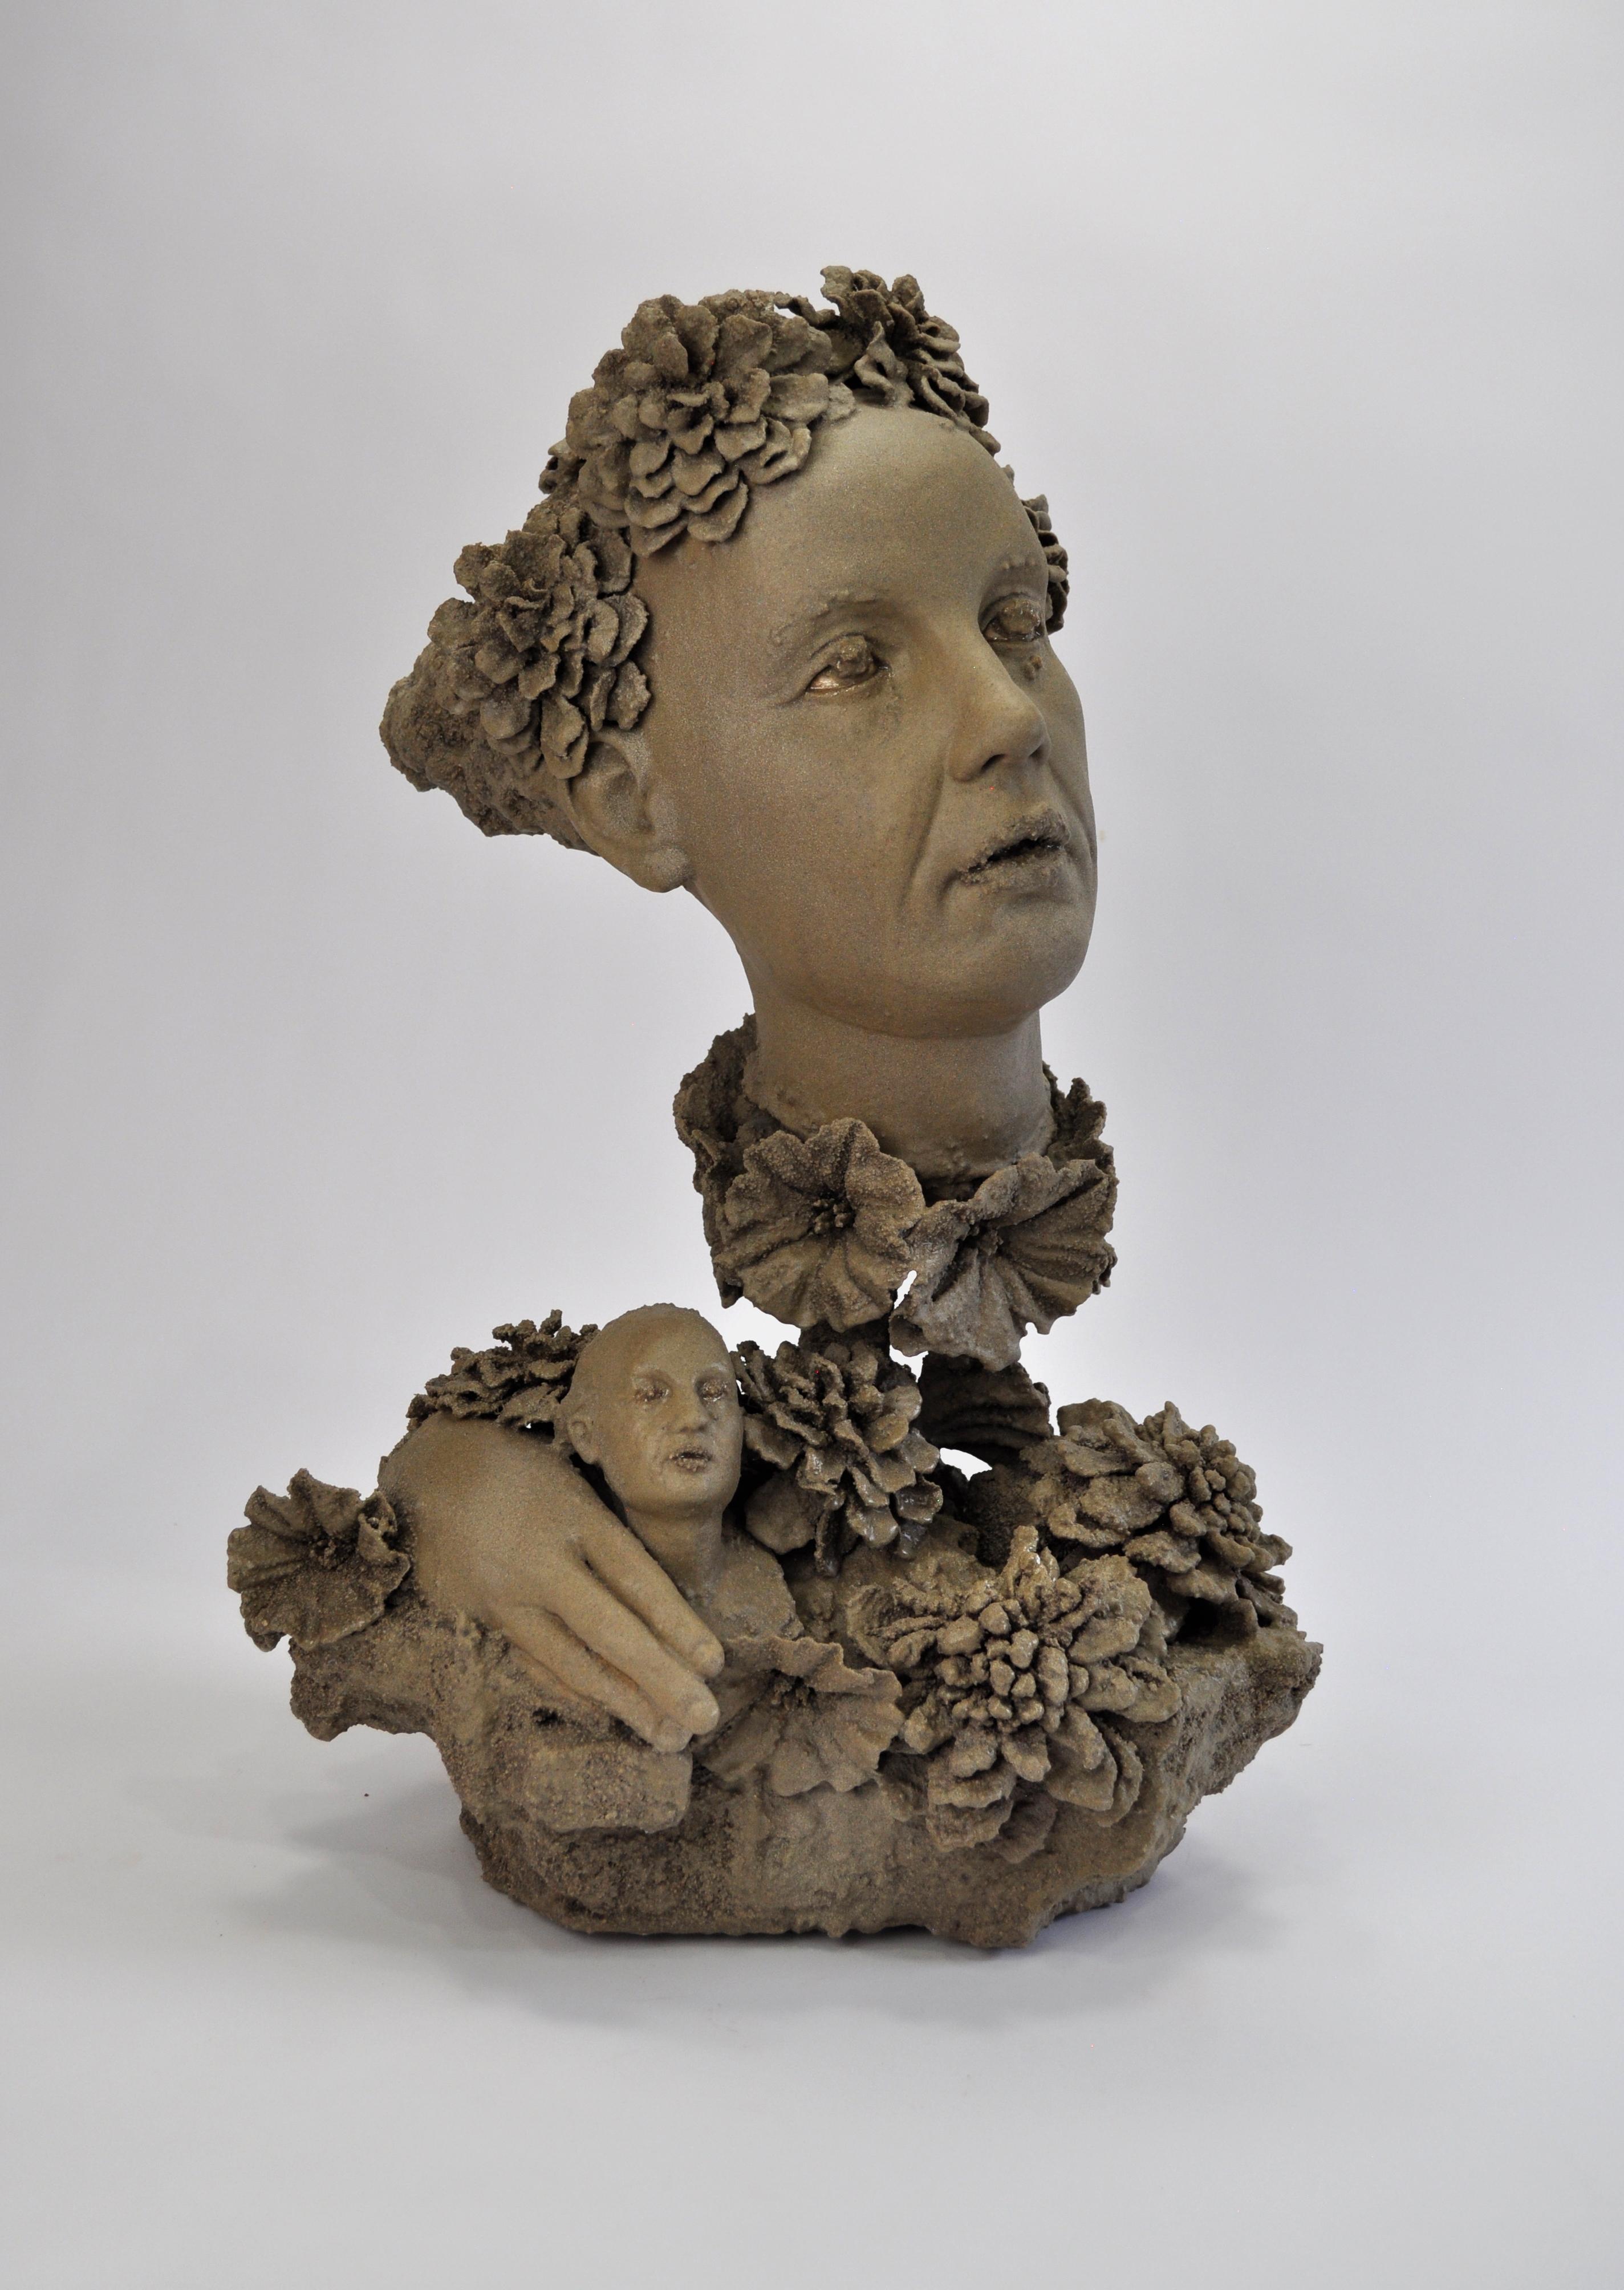 BLOOMING BUST- surreal ceramic sculpture of woman with flowers - Sculpture by Christine Golden